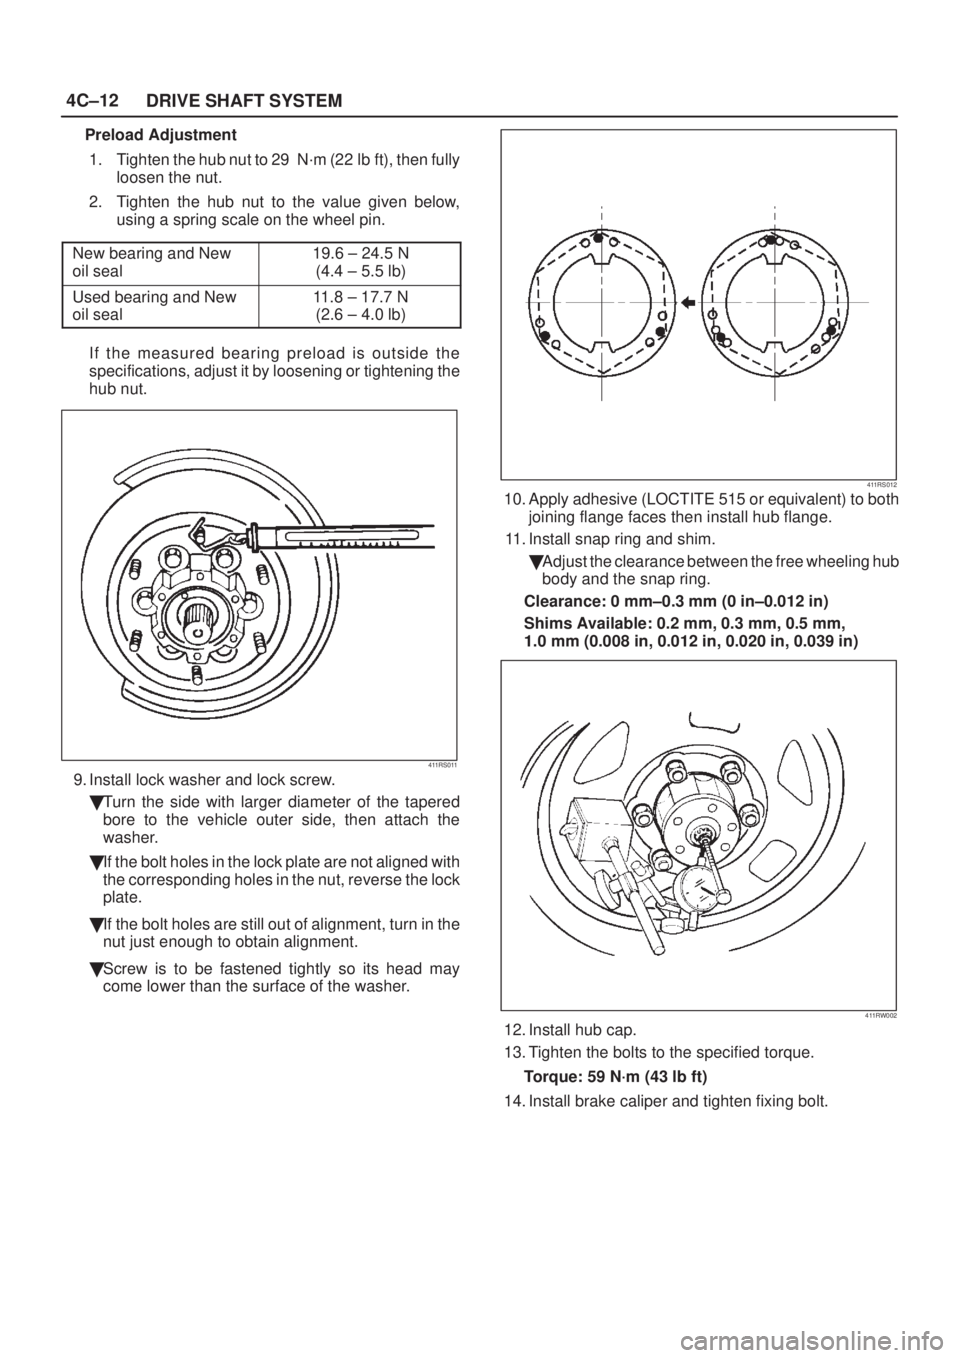 ISUZU AXIOM 2002  Service Owners Manual 4C±12
DRIVE SHAFT SYSTEM
Preload Adjustment
1. Tighten the hub nut to 29  N´m (22 lb ft), then fully
loosen the nut.
2. Tighten the hub nut to the value given below,
using a spring scale on the whee